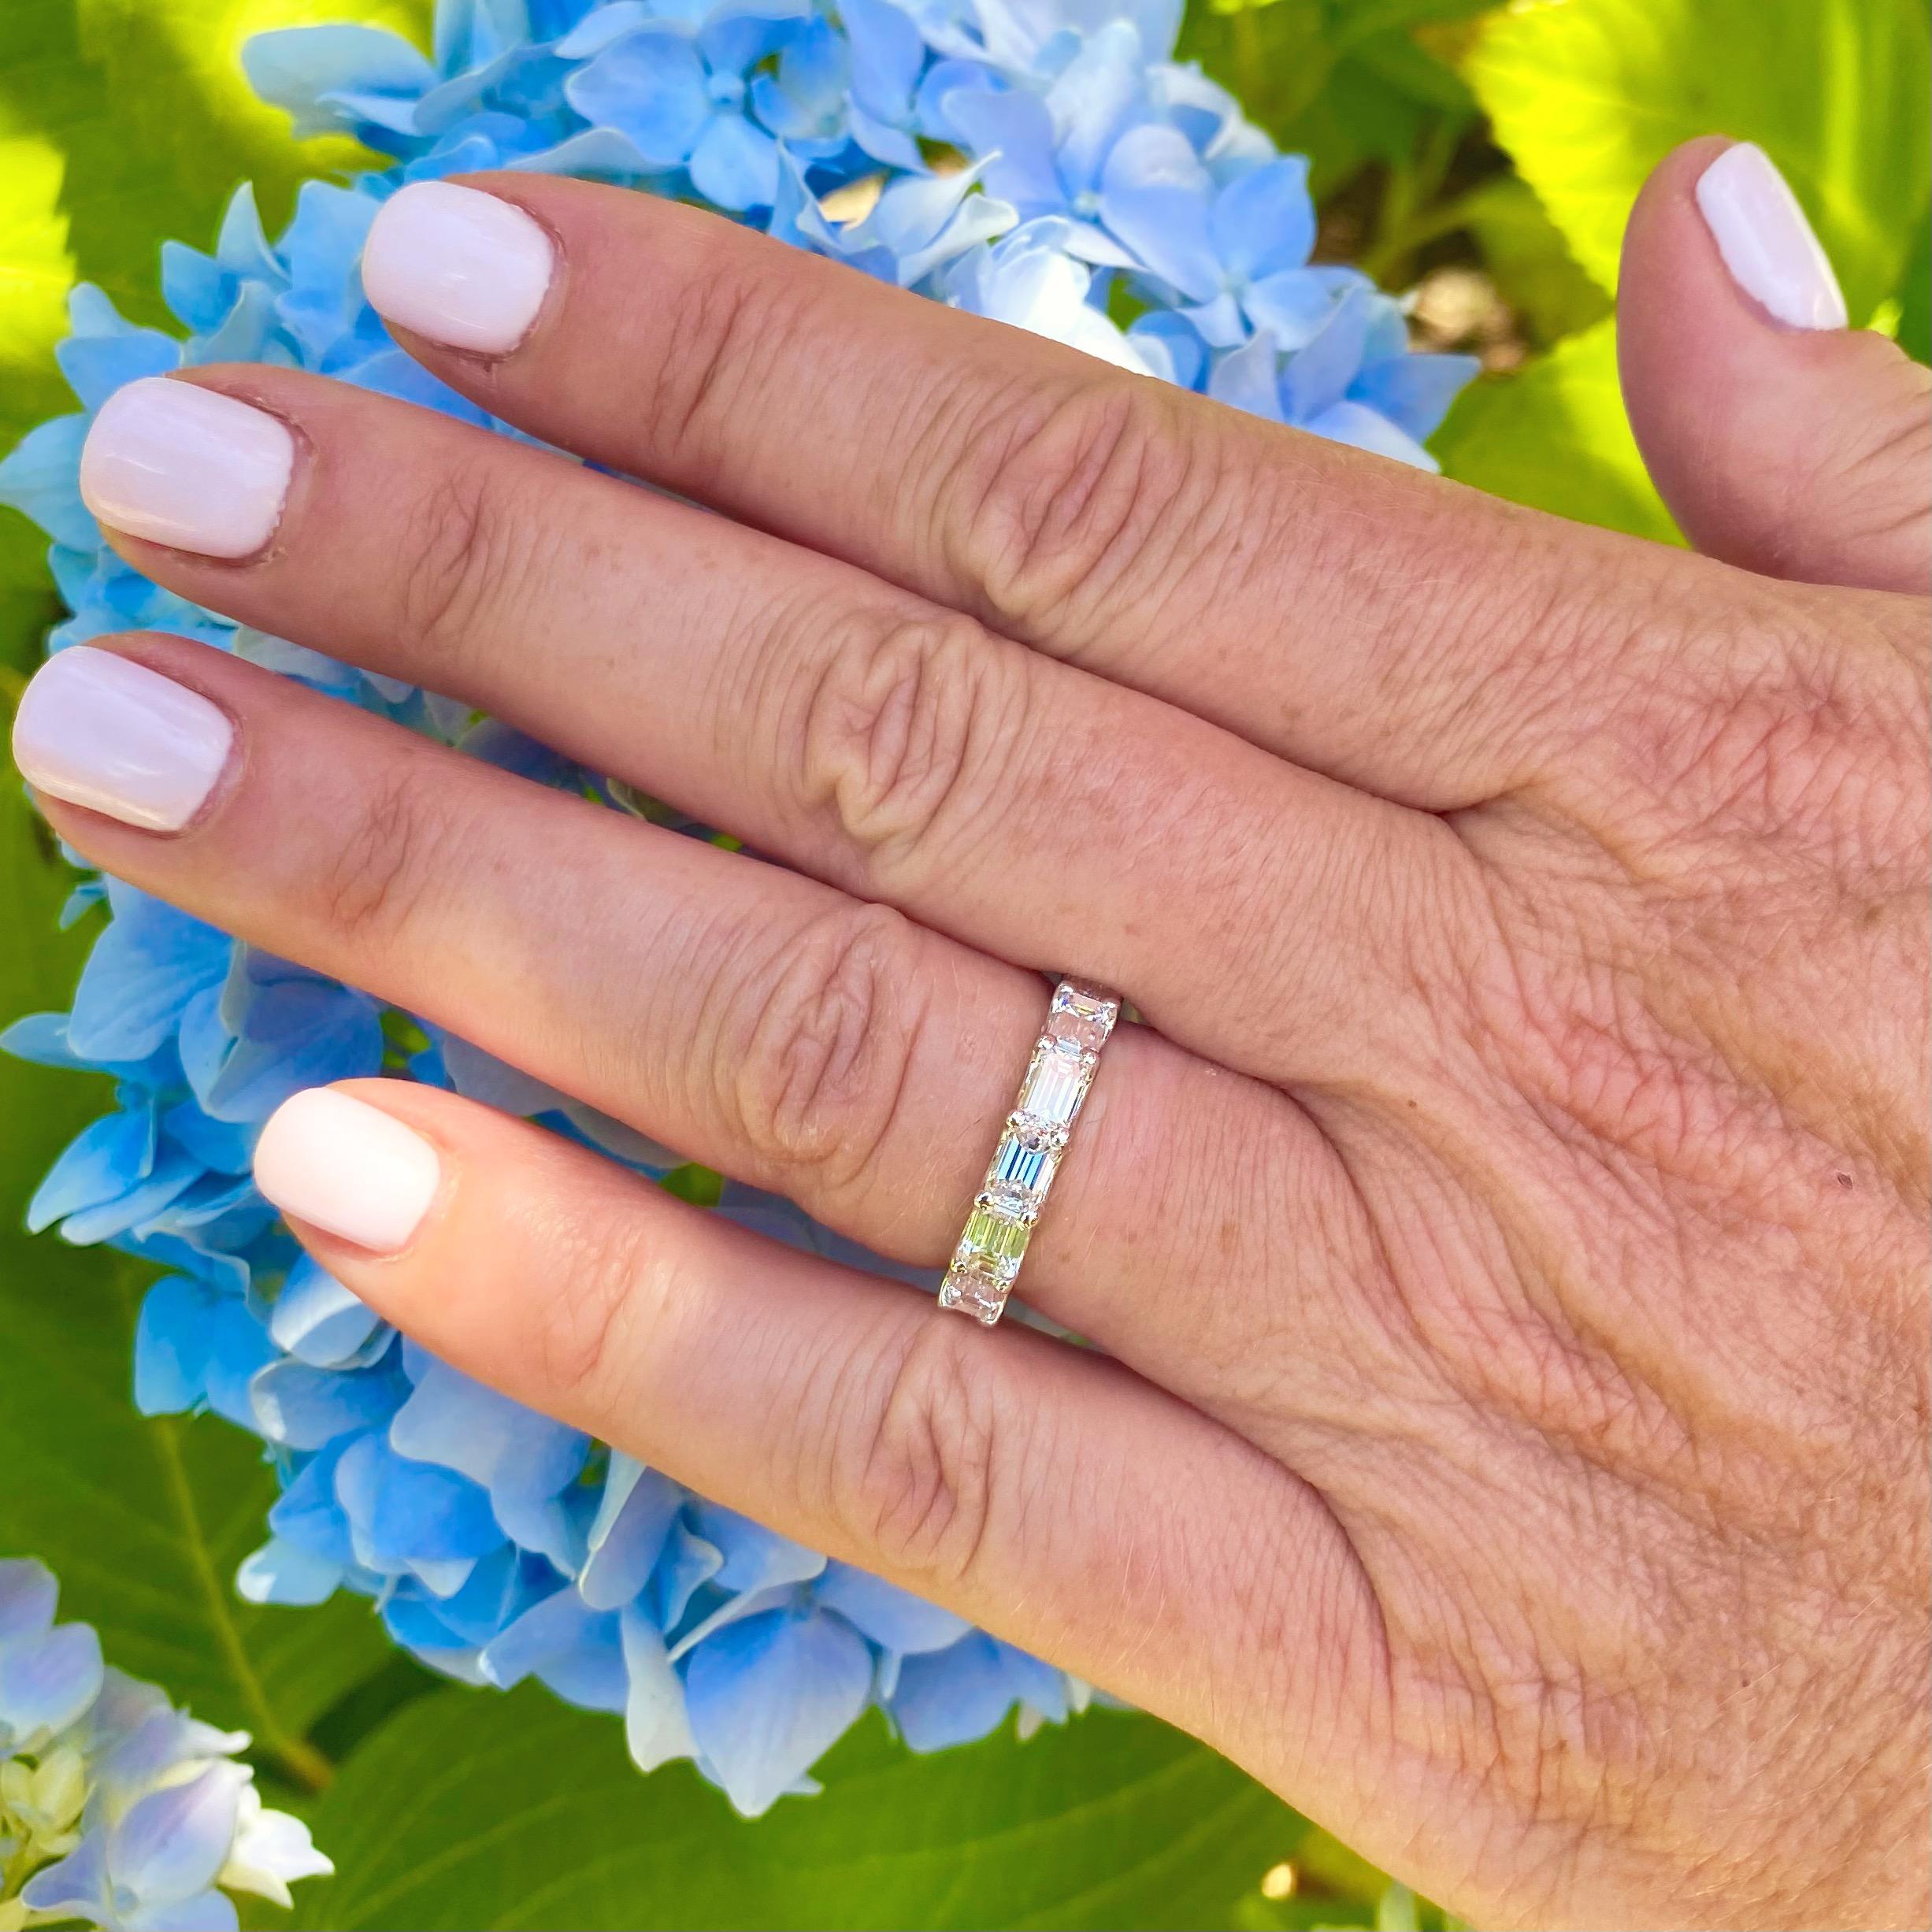 There are eternity bands, and then there's THIS eternity band. With 4.49 carats of extremely fine emerald cut diamonds perfectly set in an 18 karat white gold ring, this one is sure to turn heads. The 14 stones average H-I color and VS clarity,